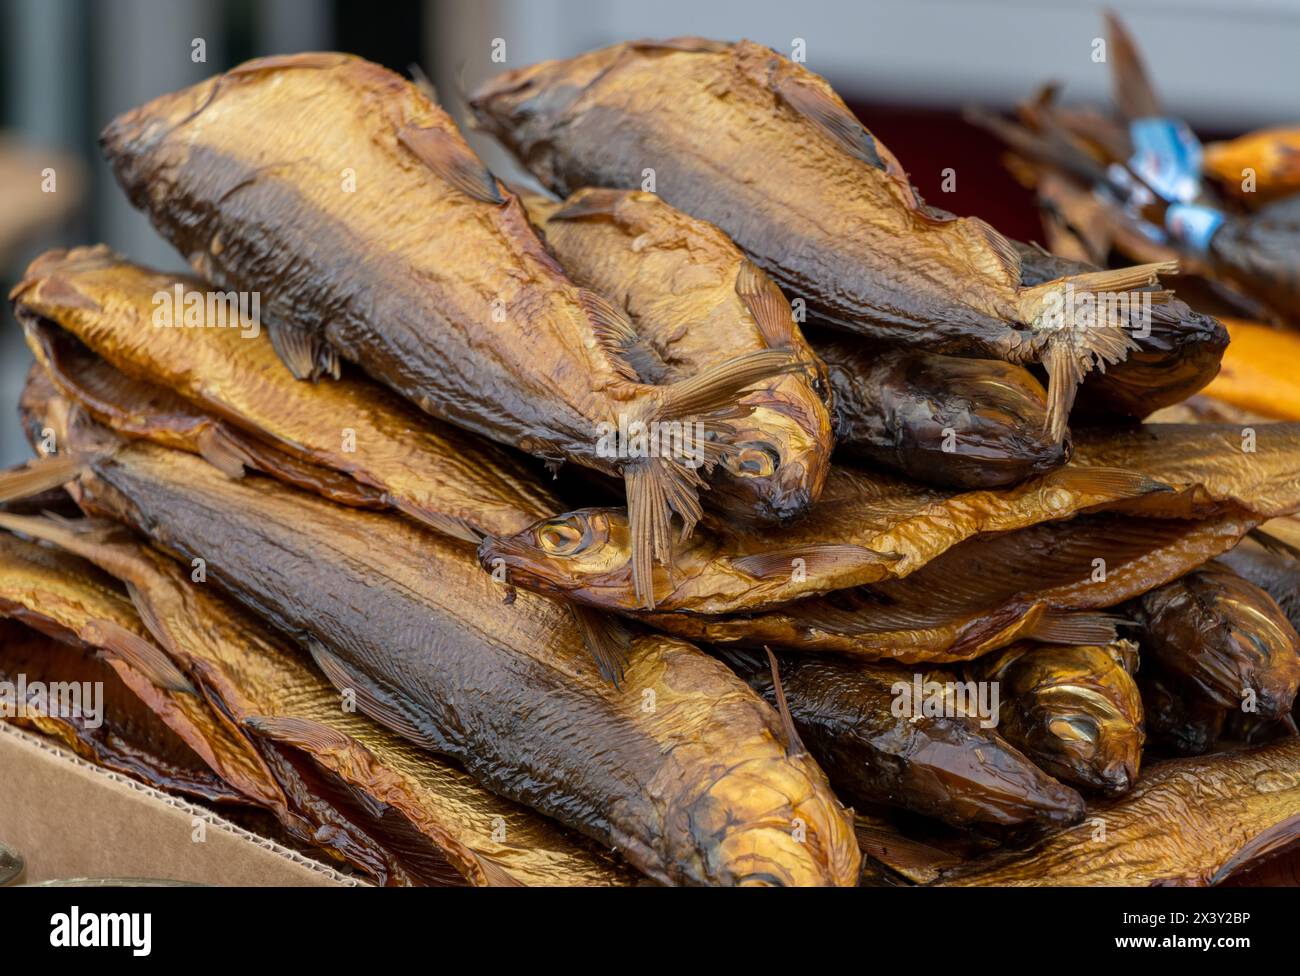 Dried and smoked lake trout fish Stock Photo